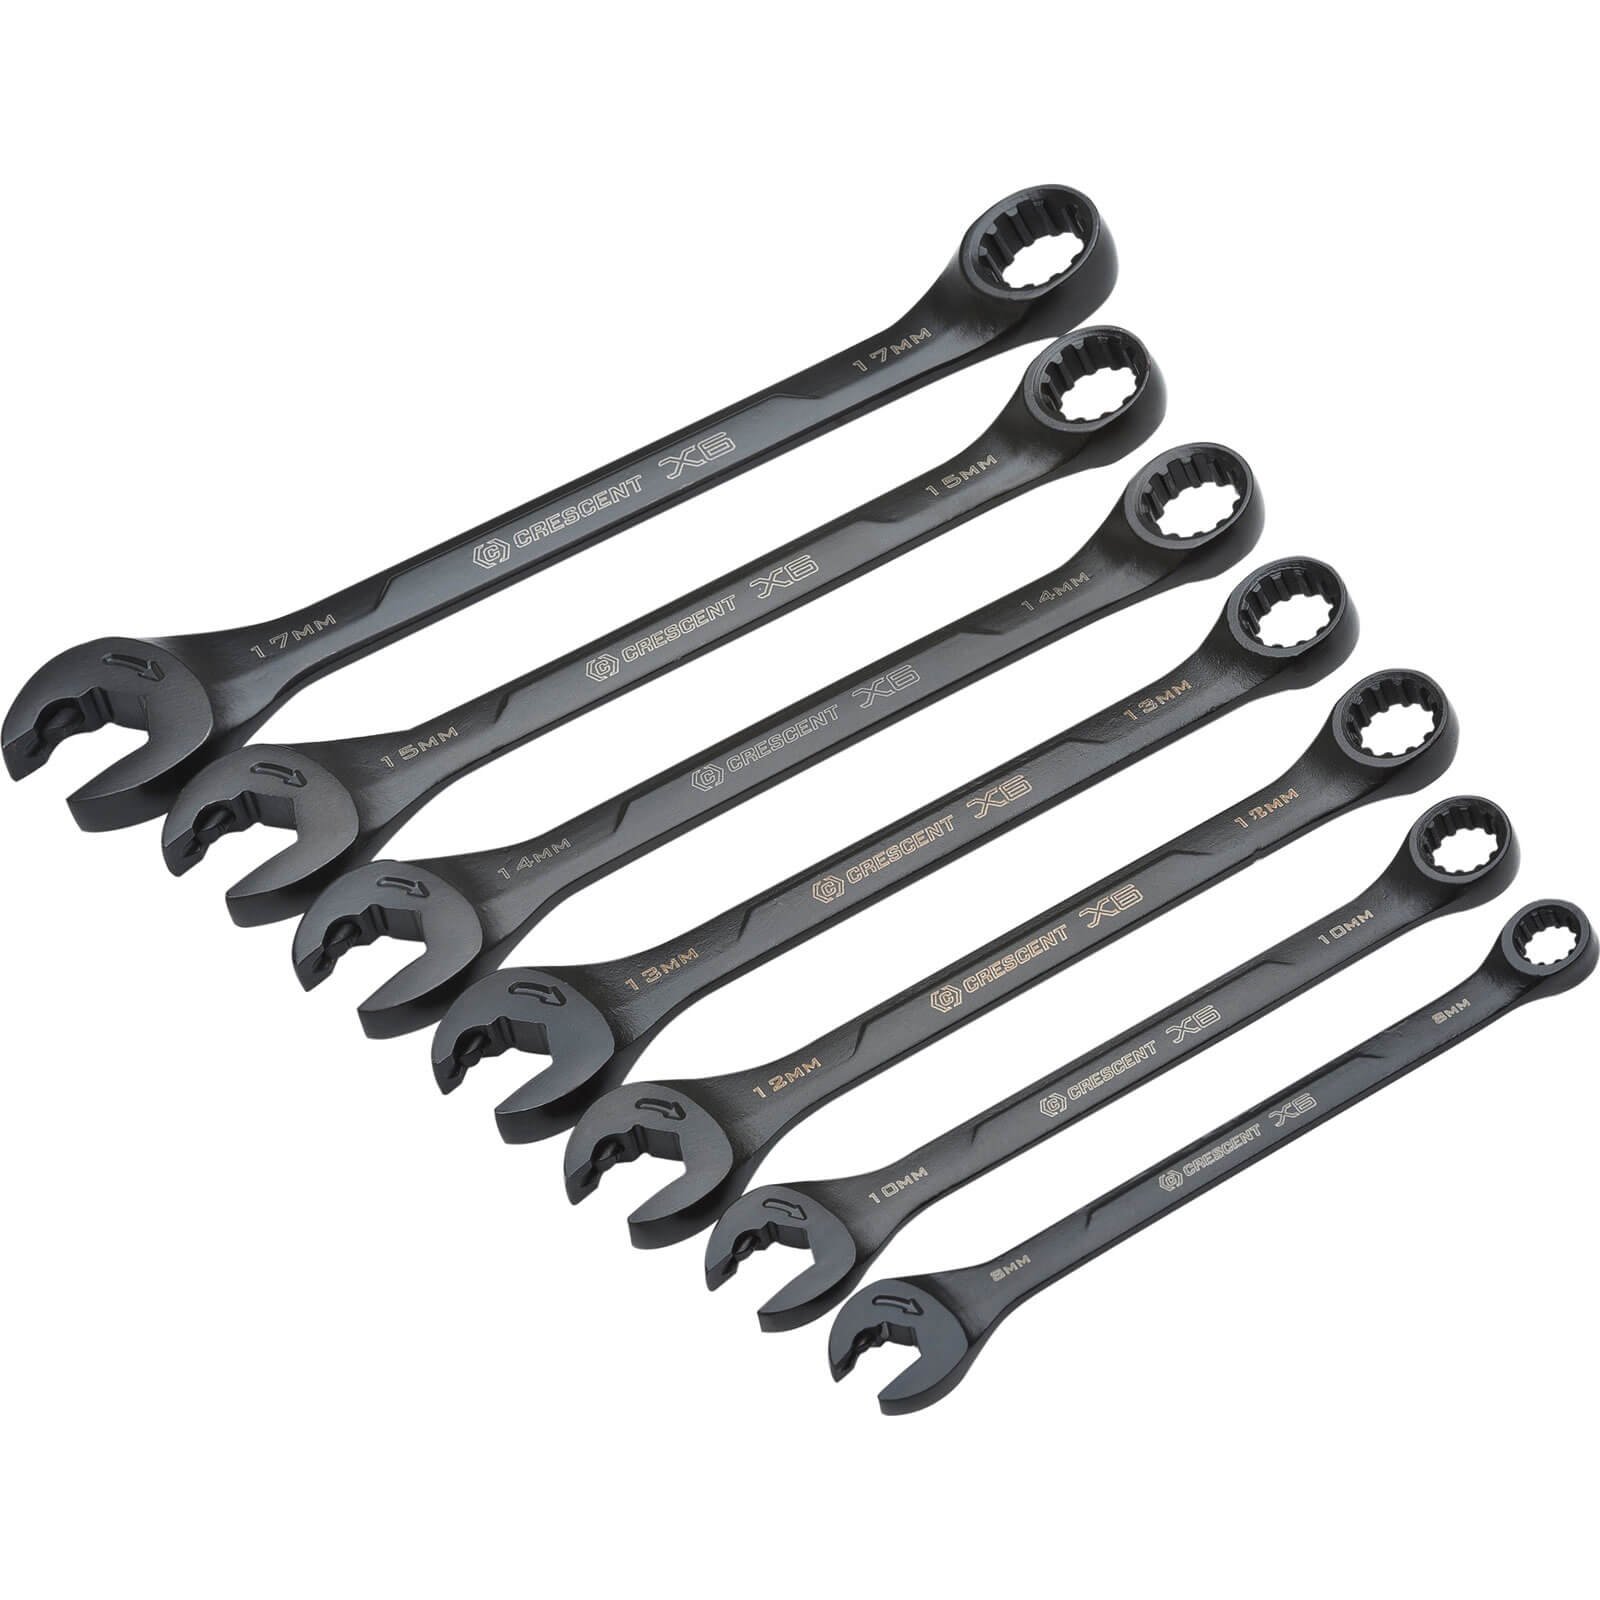 Image of Crescent 7 Piece X6 Open End Ratcheting Wrench Set